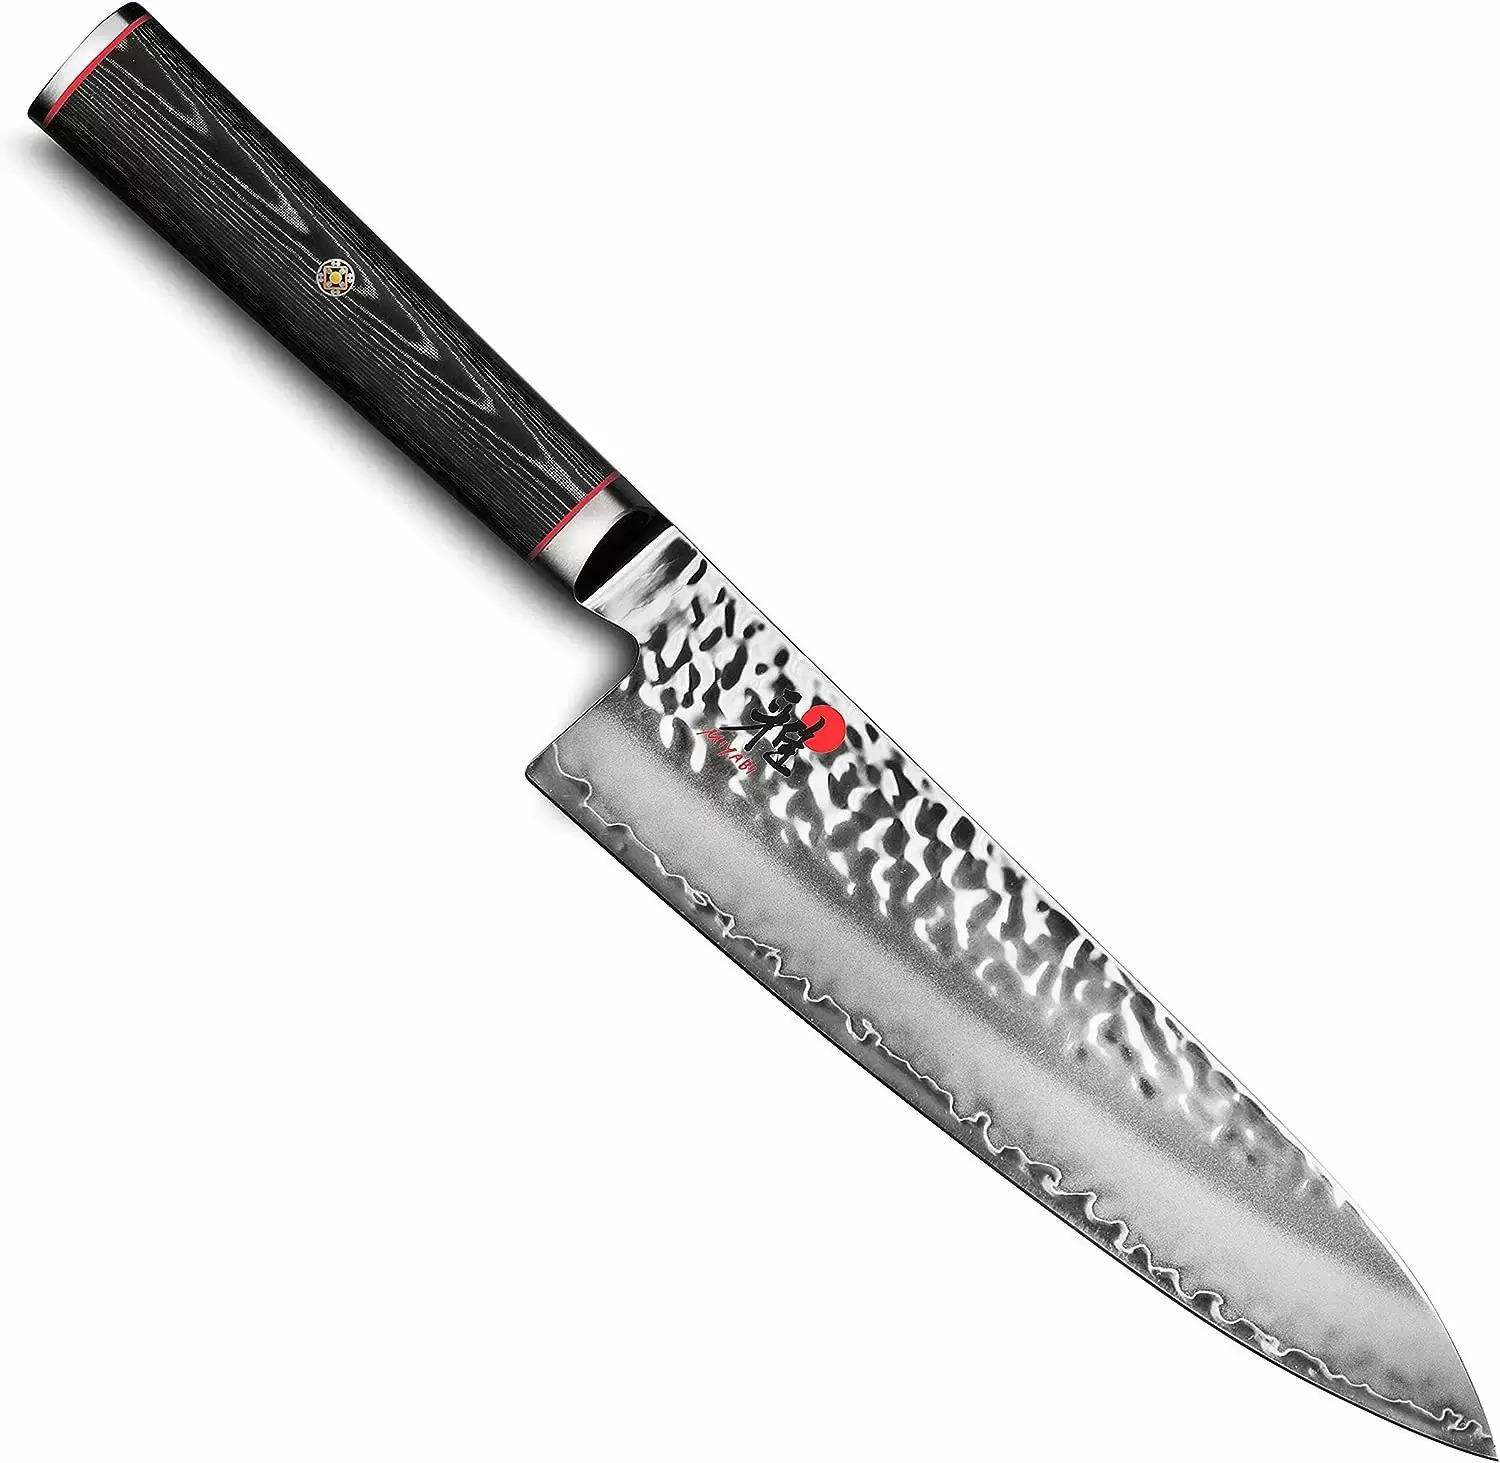 8in Miyabi Mizu SG2 Micro-Carbide Stainless Steel Chefs Knife for $149.95 Shipped